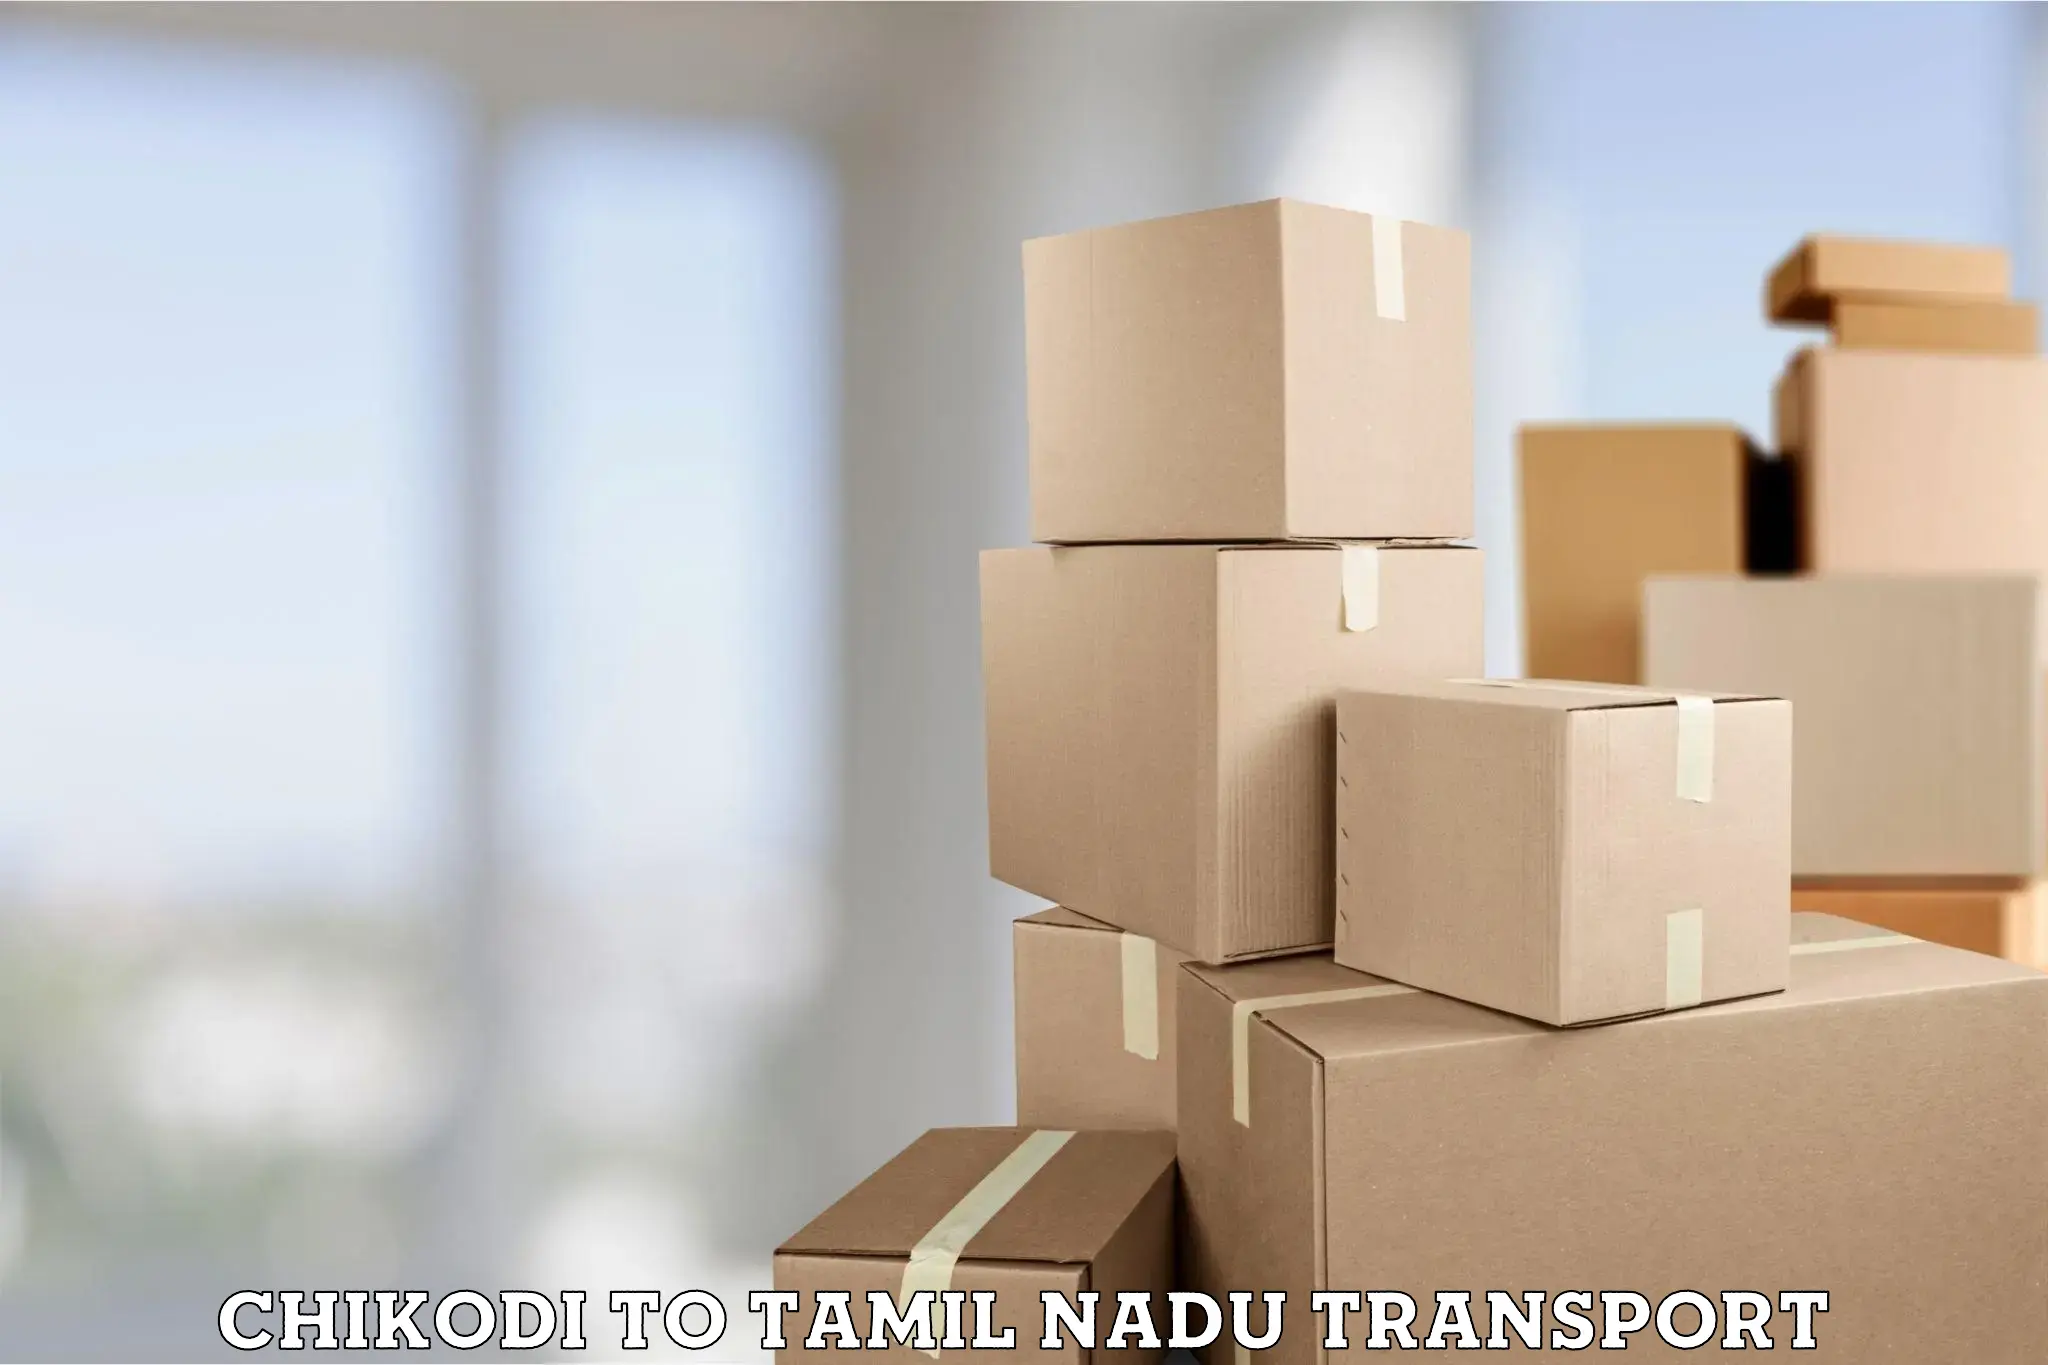 Vehicle transport services in Chikodi to Trichy